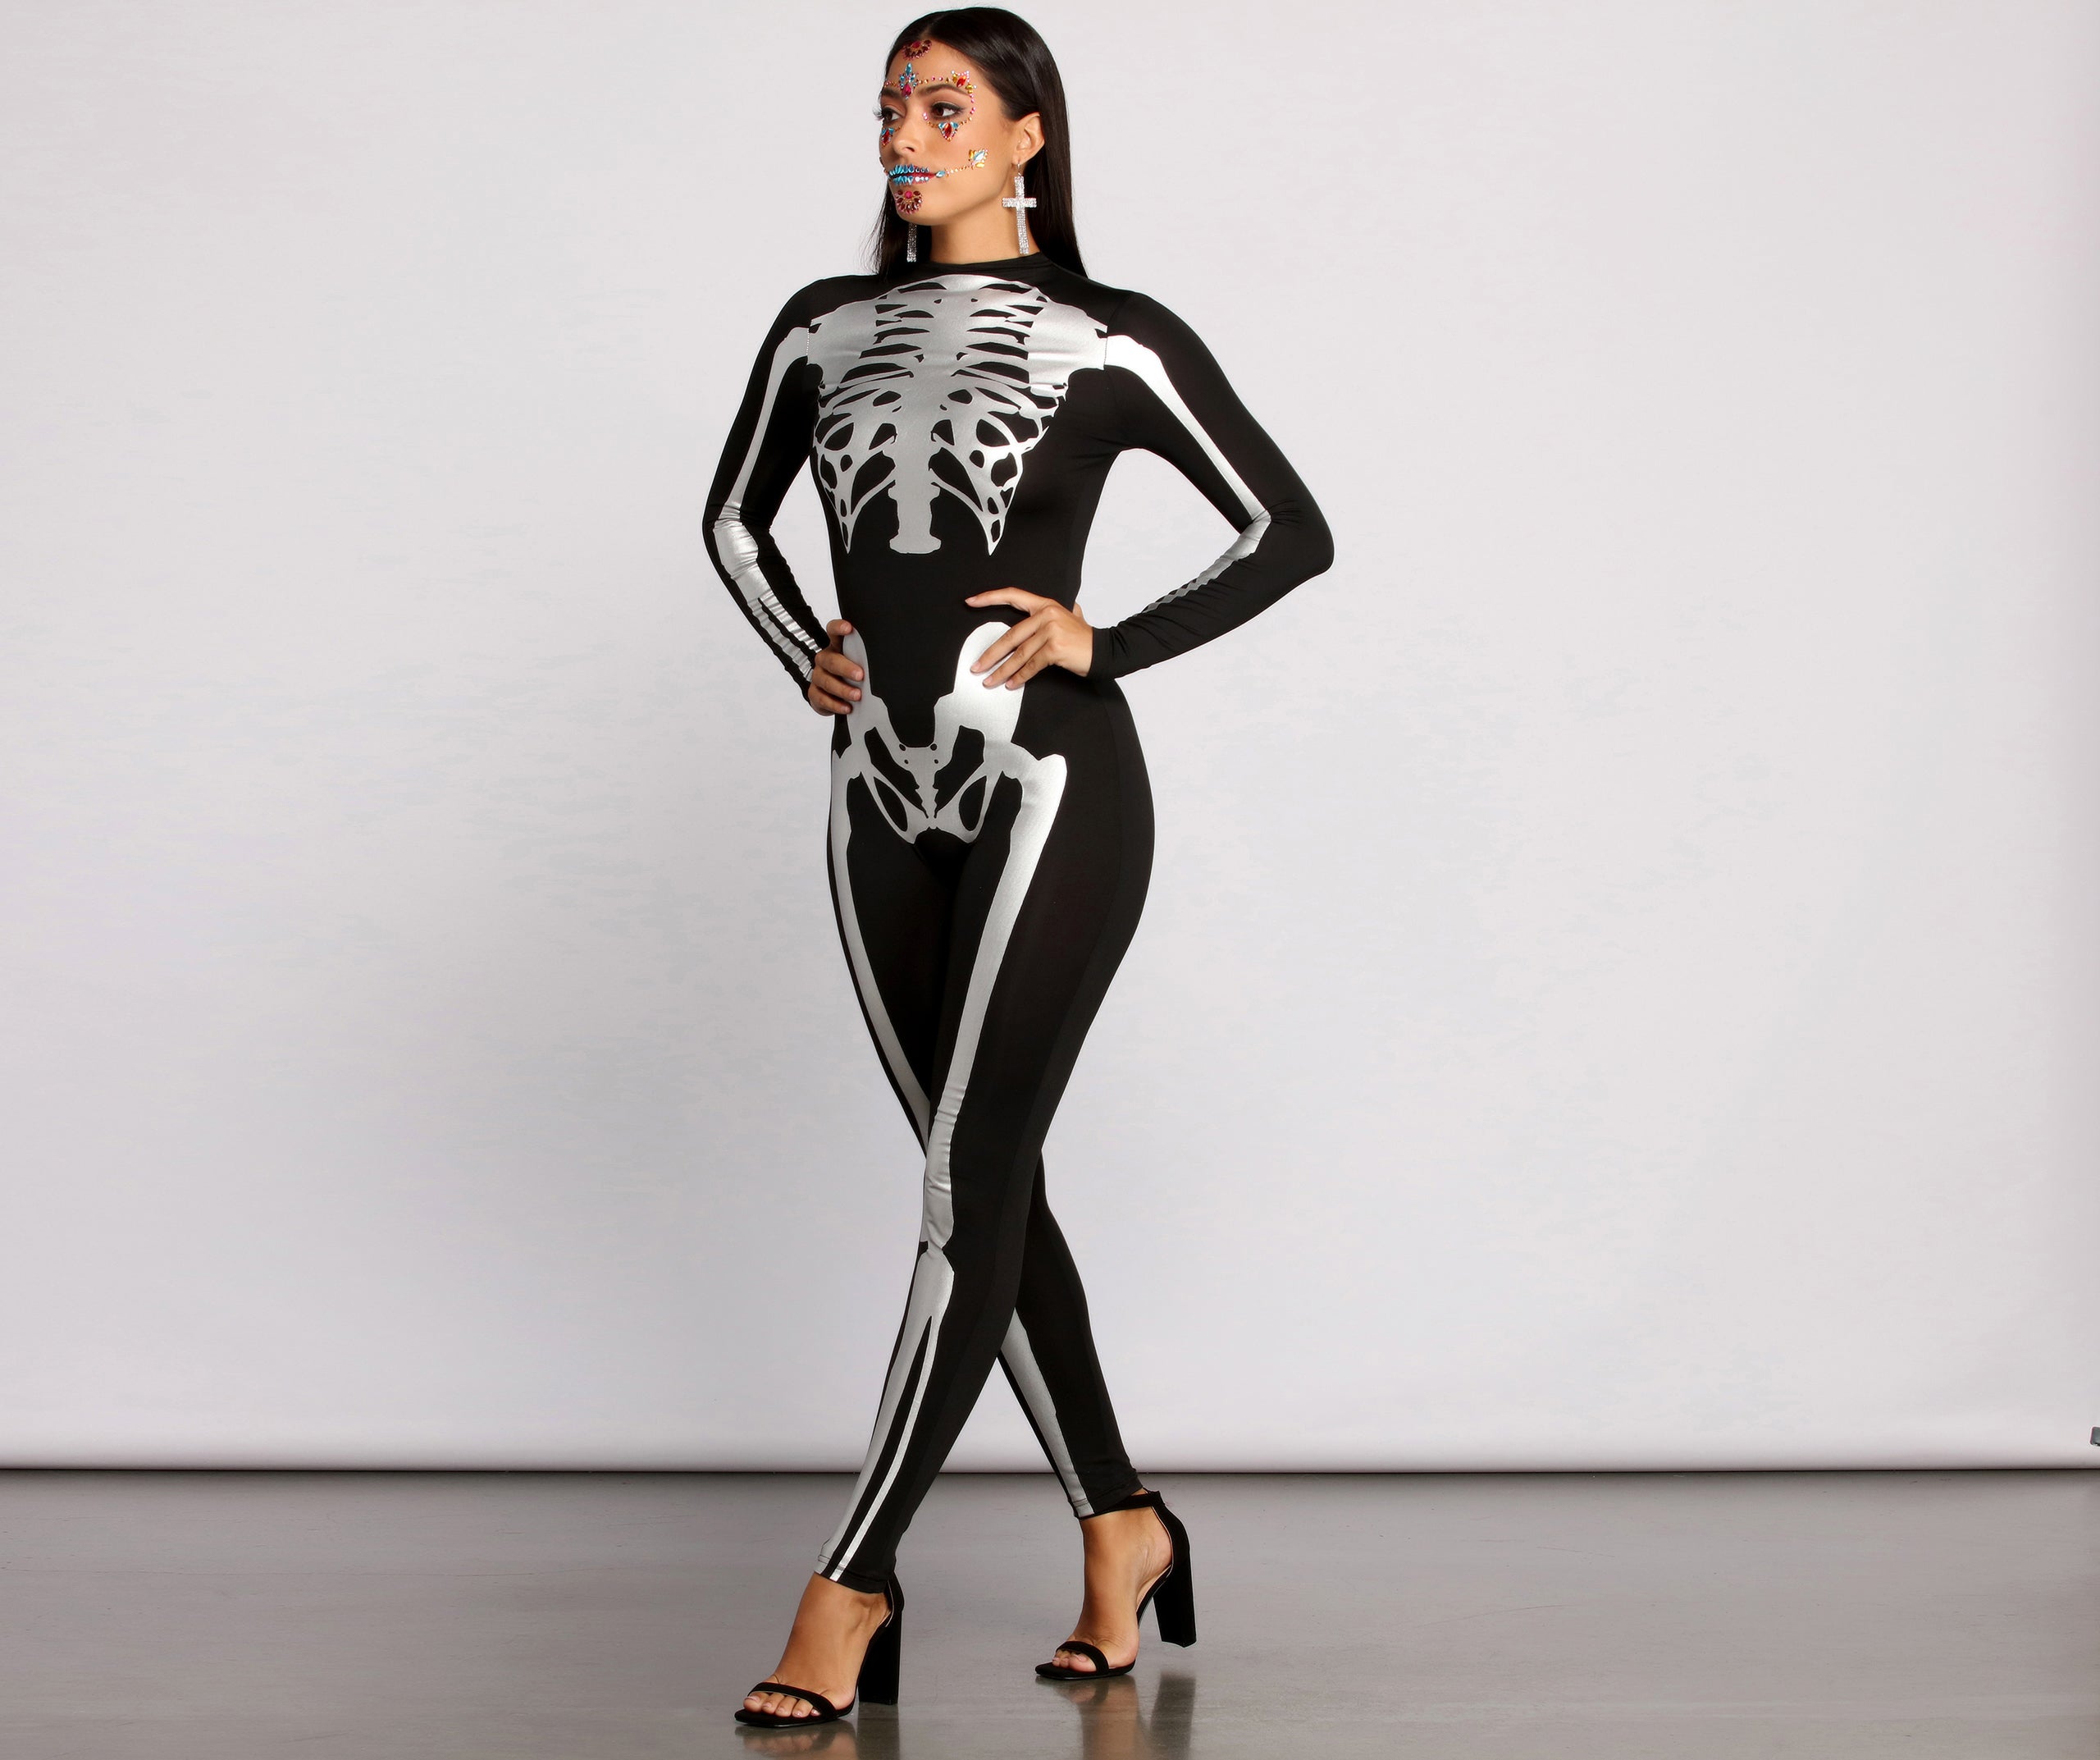 Sultry Skeleton Babe Knit Catsuit